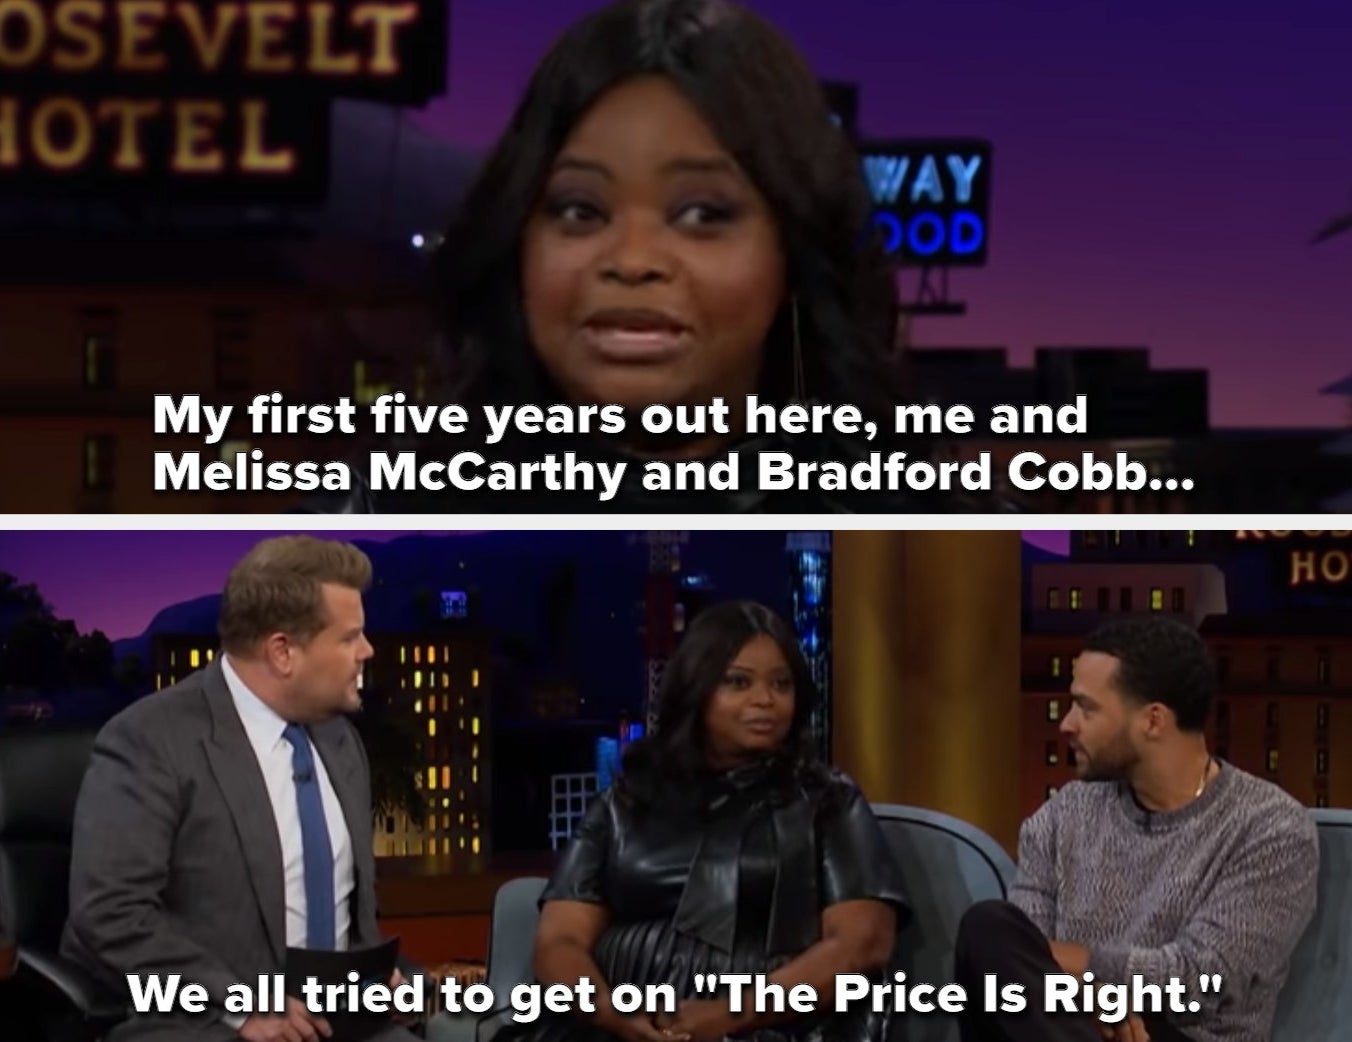 Octavia Spencer explaining how she and Melissa McCarthy tried to get on &quot;The Price Is Right&quot; on &quot;The Late Late Show With James Corden&quot;